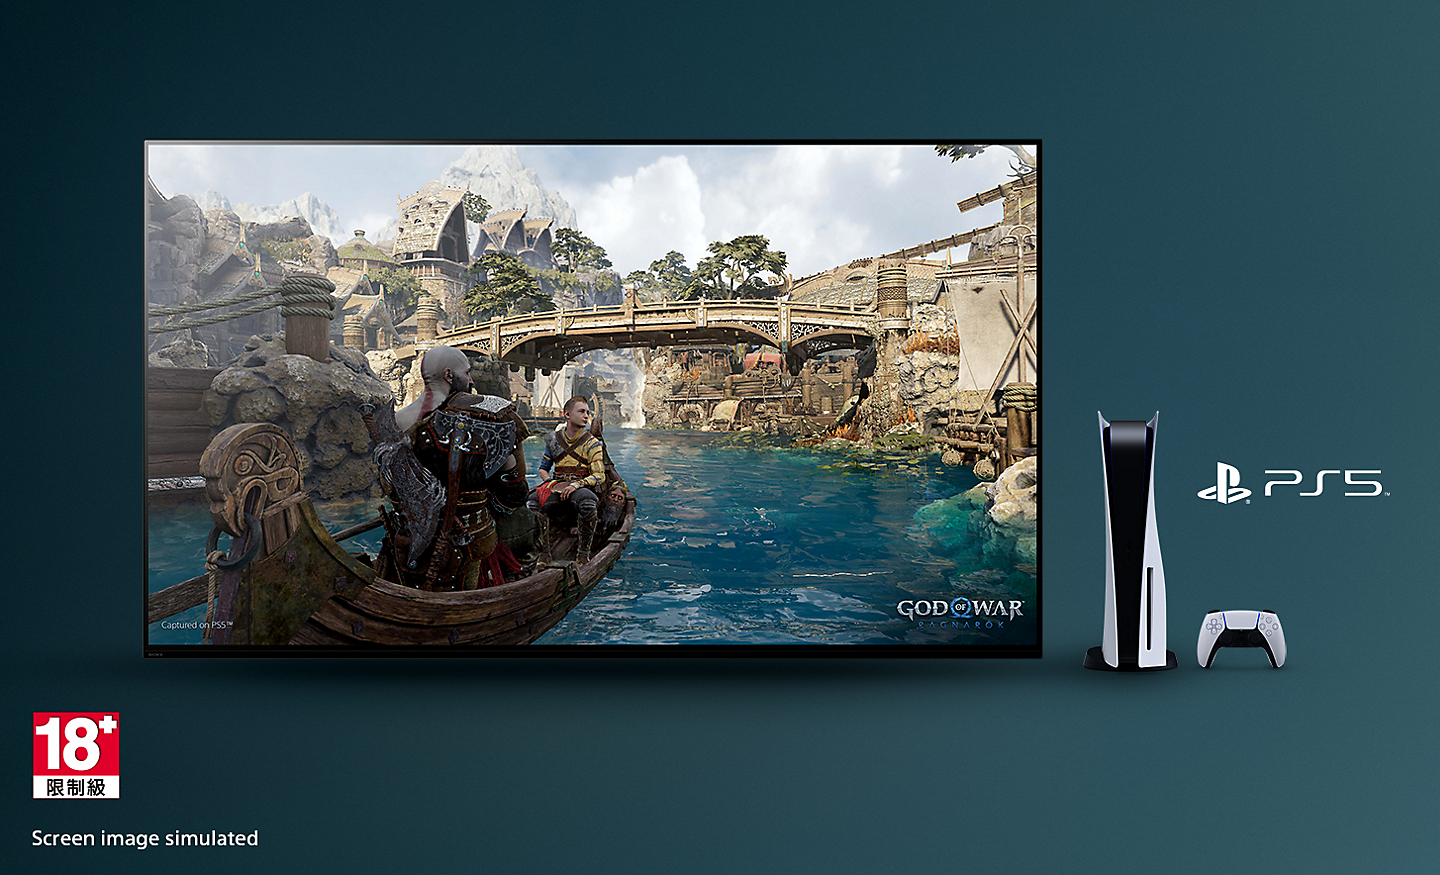 BRAVIA TV with screenshot of God of War: Ragnarok showing a boat on a river and bridge in background with PS5™ console, controller and PS5™ logo to the right of the TV